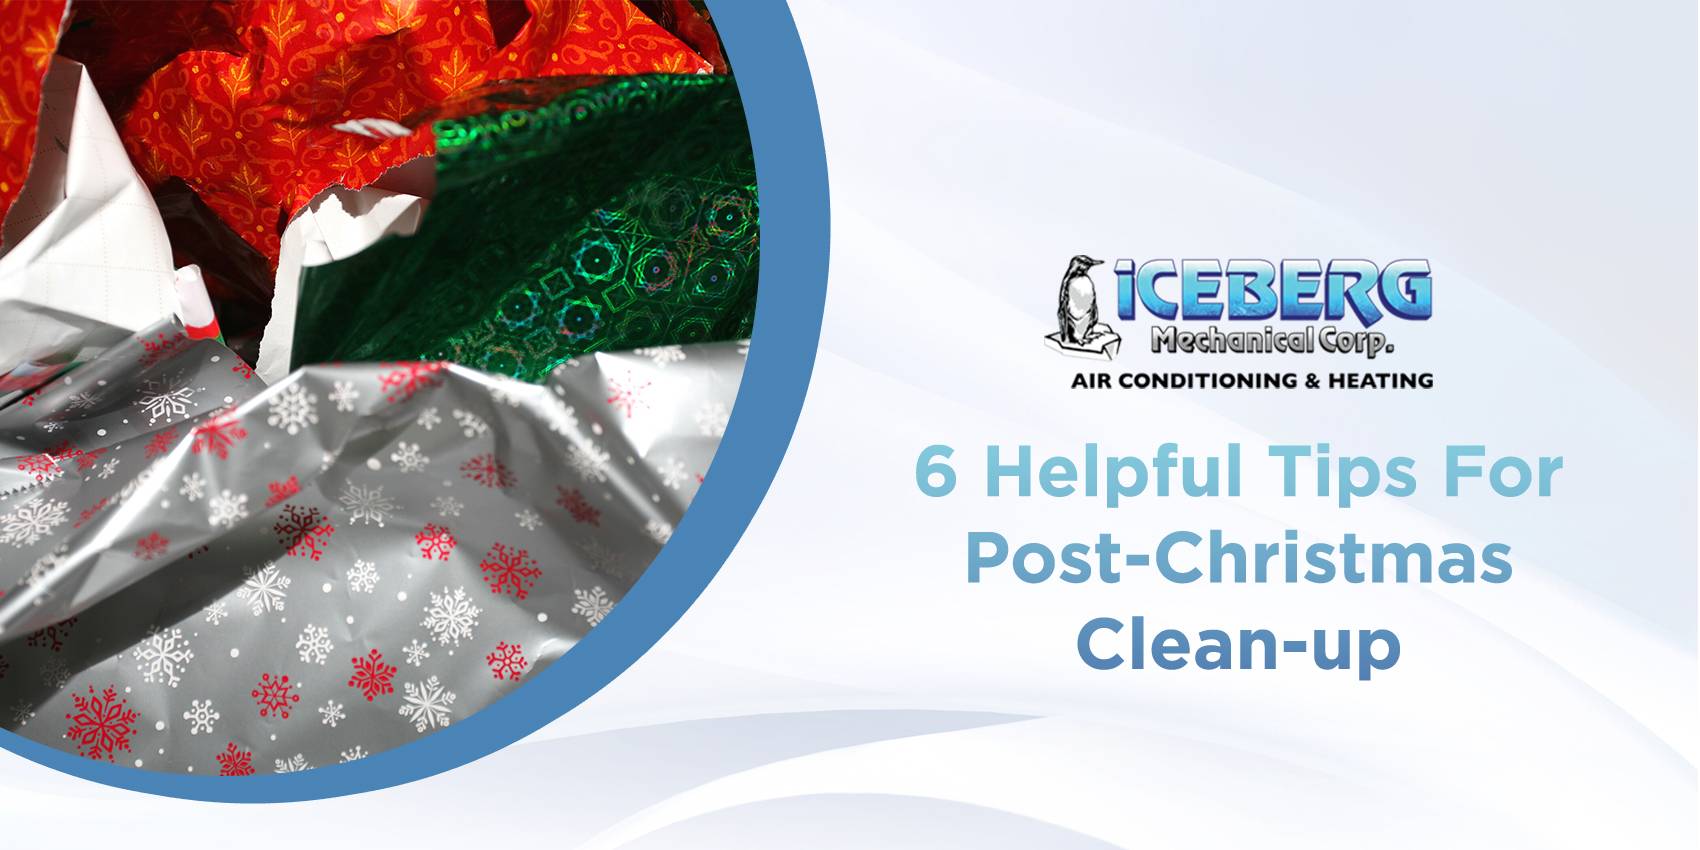 6 Helpful Tips for Post-Christmas Clean-up